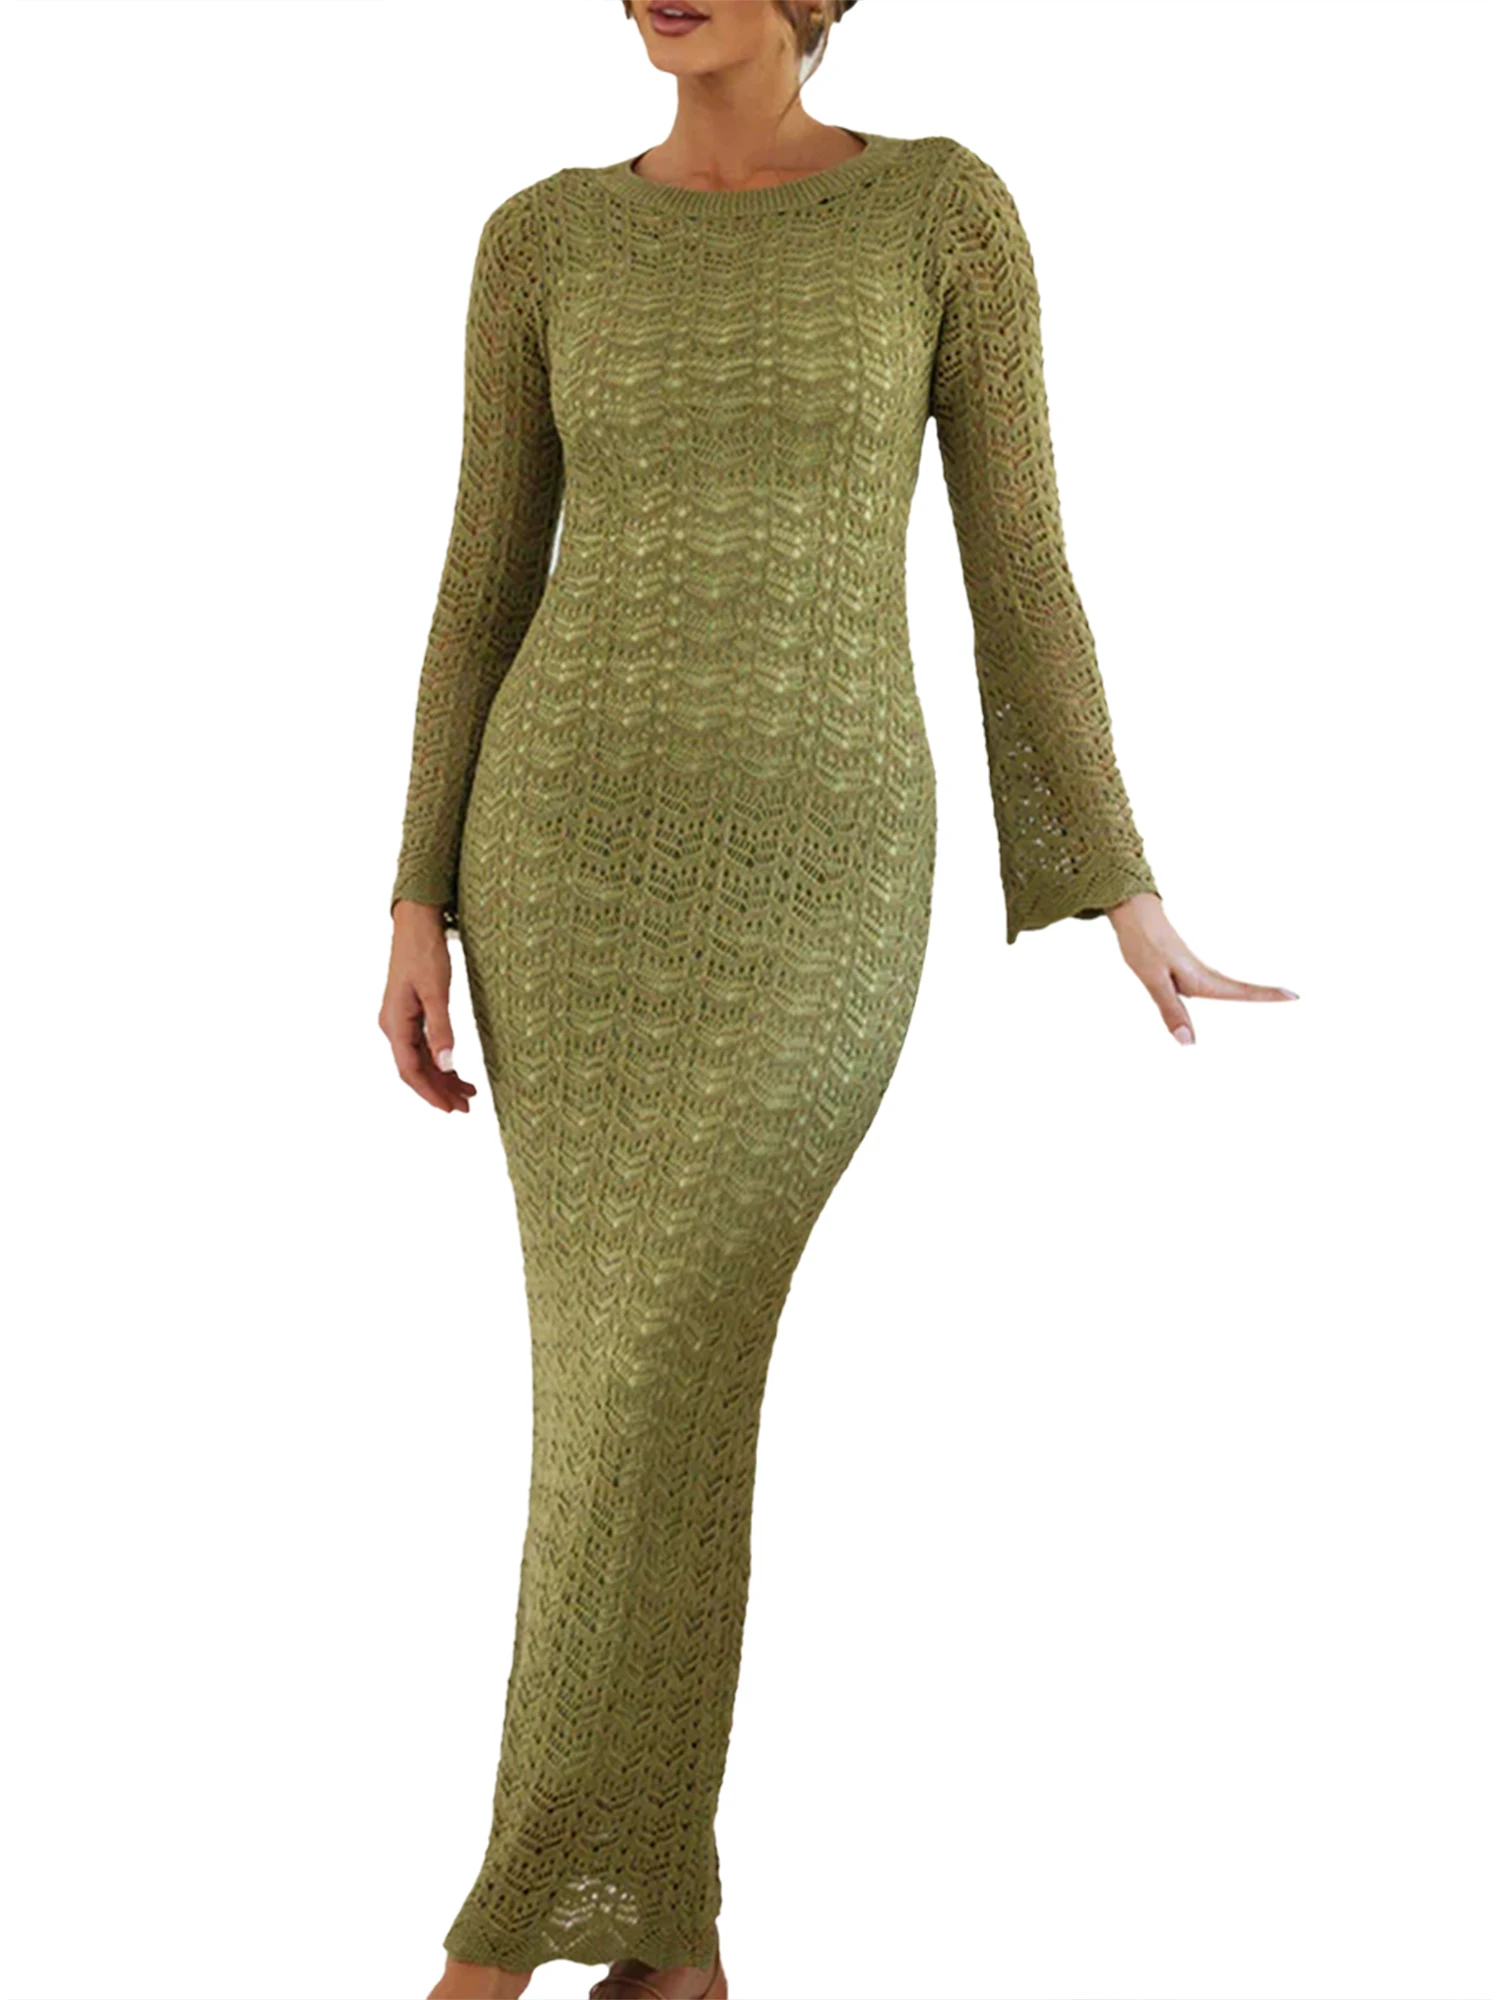 

Y2k Women s V-Neck Knit Dress with Cut-Out Details Solid Color Bodycon Long Sleeve Dress for Summer Beachwear